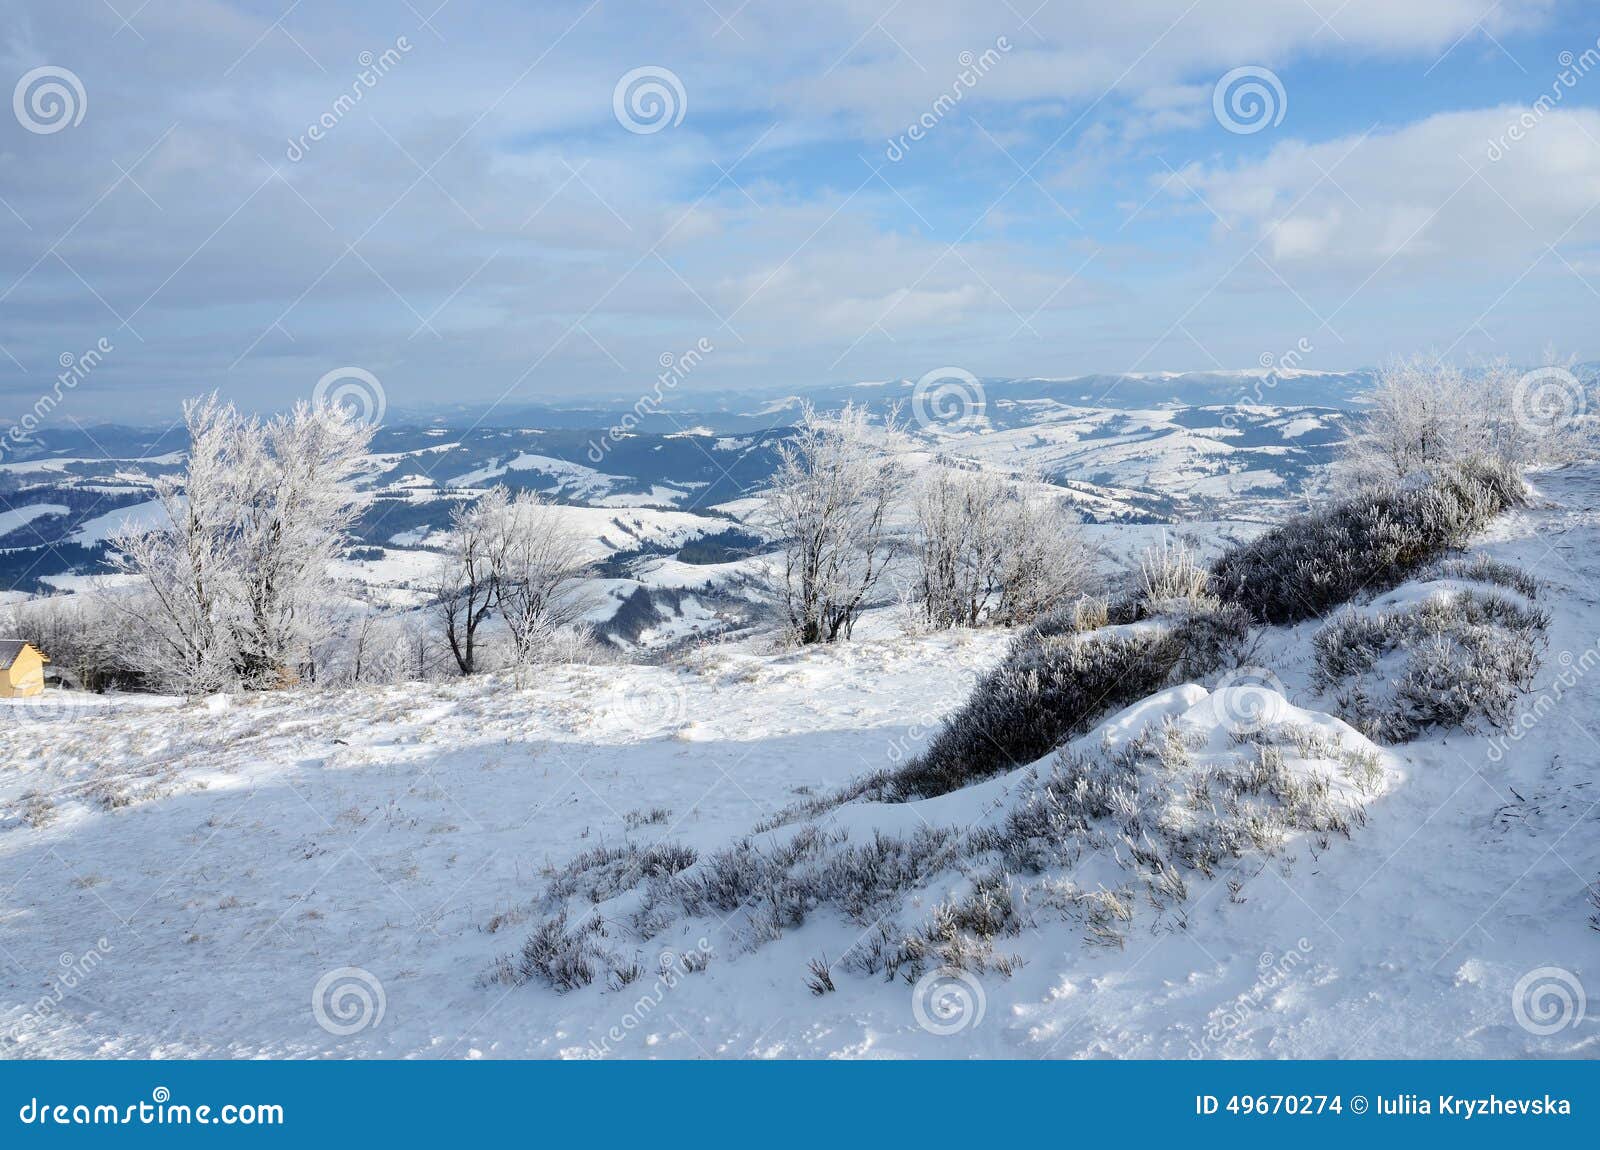 view from gemba mountain during winter sunny day trip,ukraine